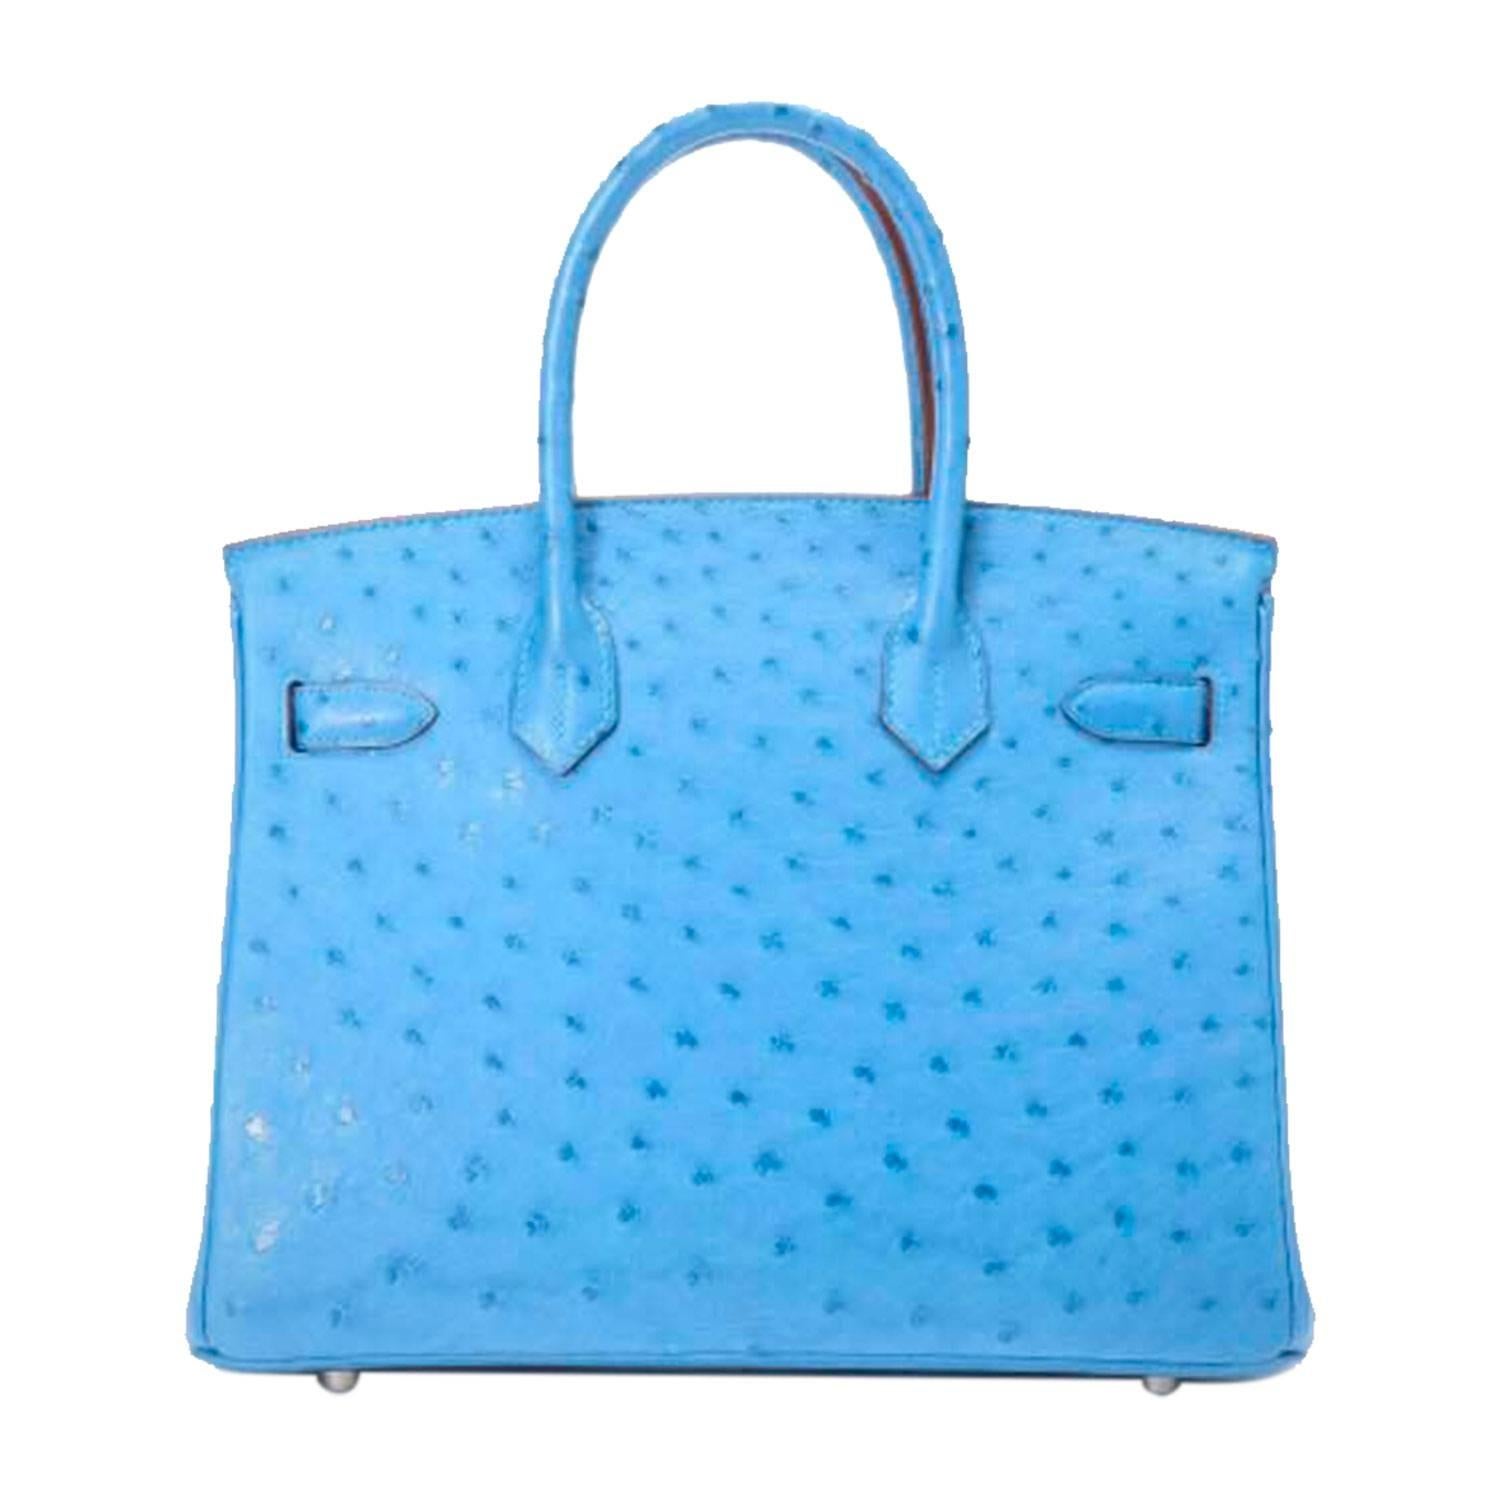 Hermes Handbag Birkin 30 Ostrich Leather 7Q Blue Mykonos Color Palladium Hardware 2015

Pre-owned and never used.

Bought it in Hermes store in 2015.

Composition: Ostrich Leather.

Model: Birkin.

Size: 30cm width x 22cm height x 16cm